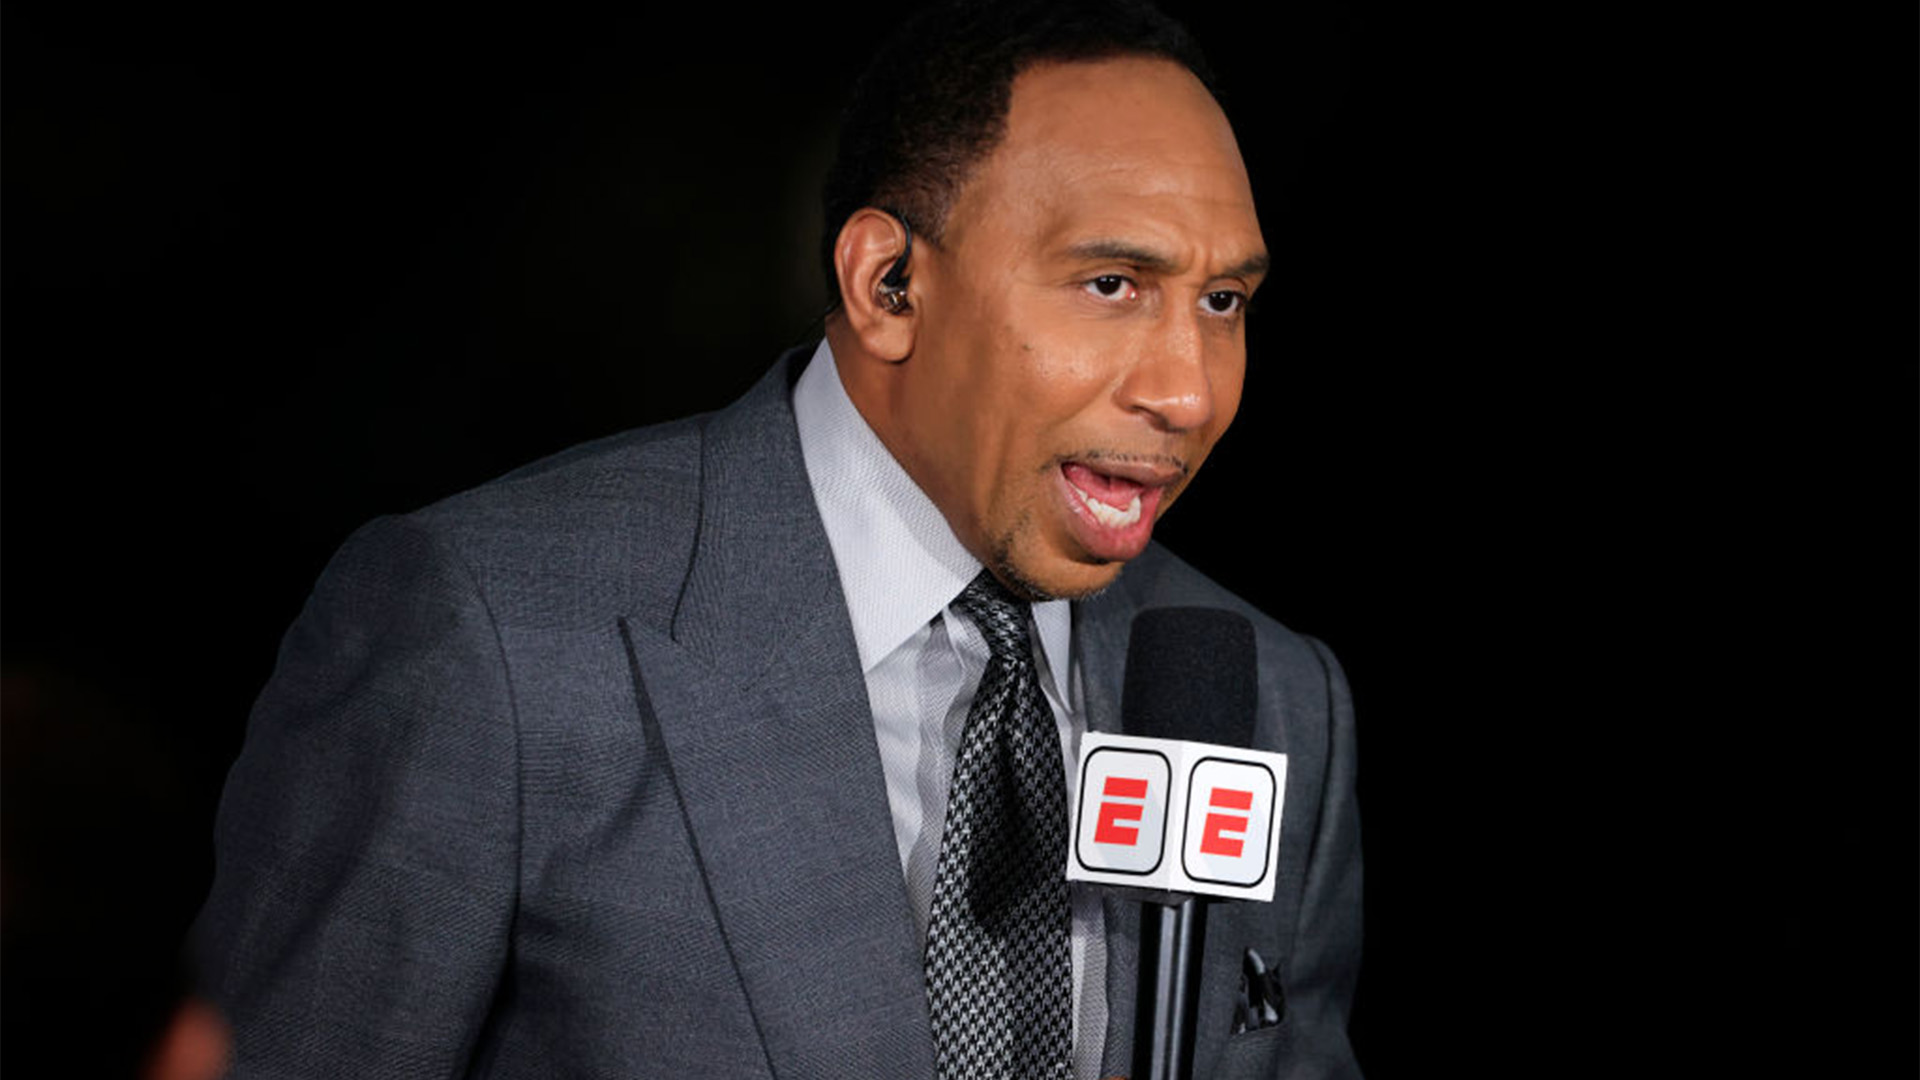 Despite His Reported $12M Salary, Stephen A. Smith Says He's 'Underpaid Compared To Some People On Television'